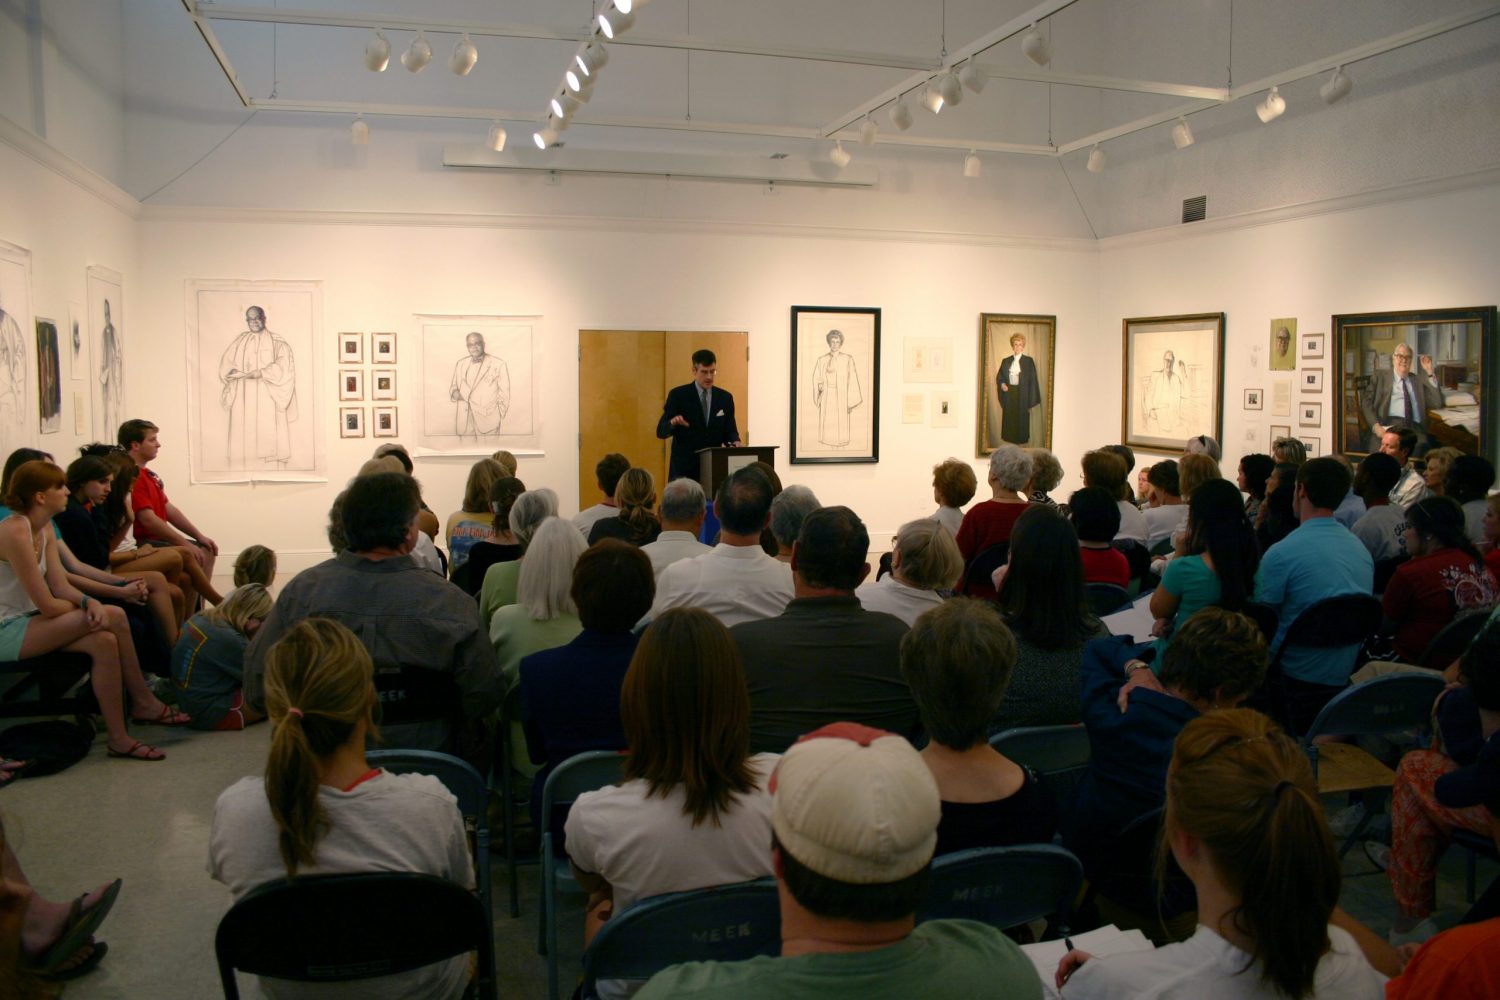 An artist gives a talk to a large crowd in the department's gallery.